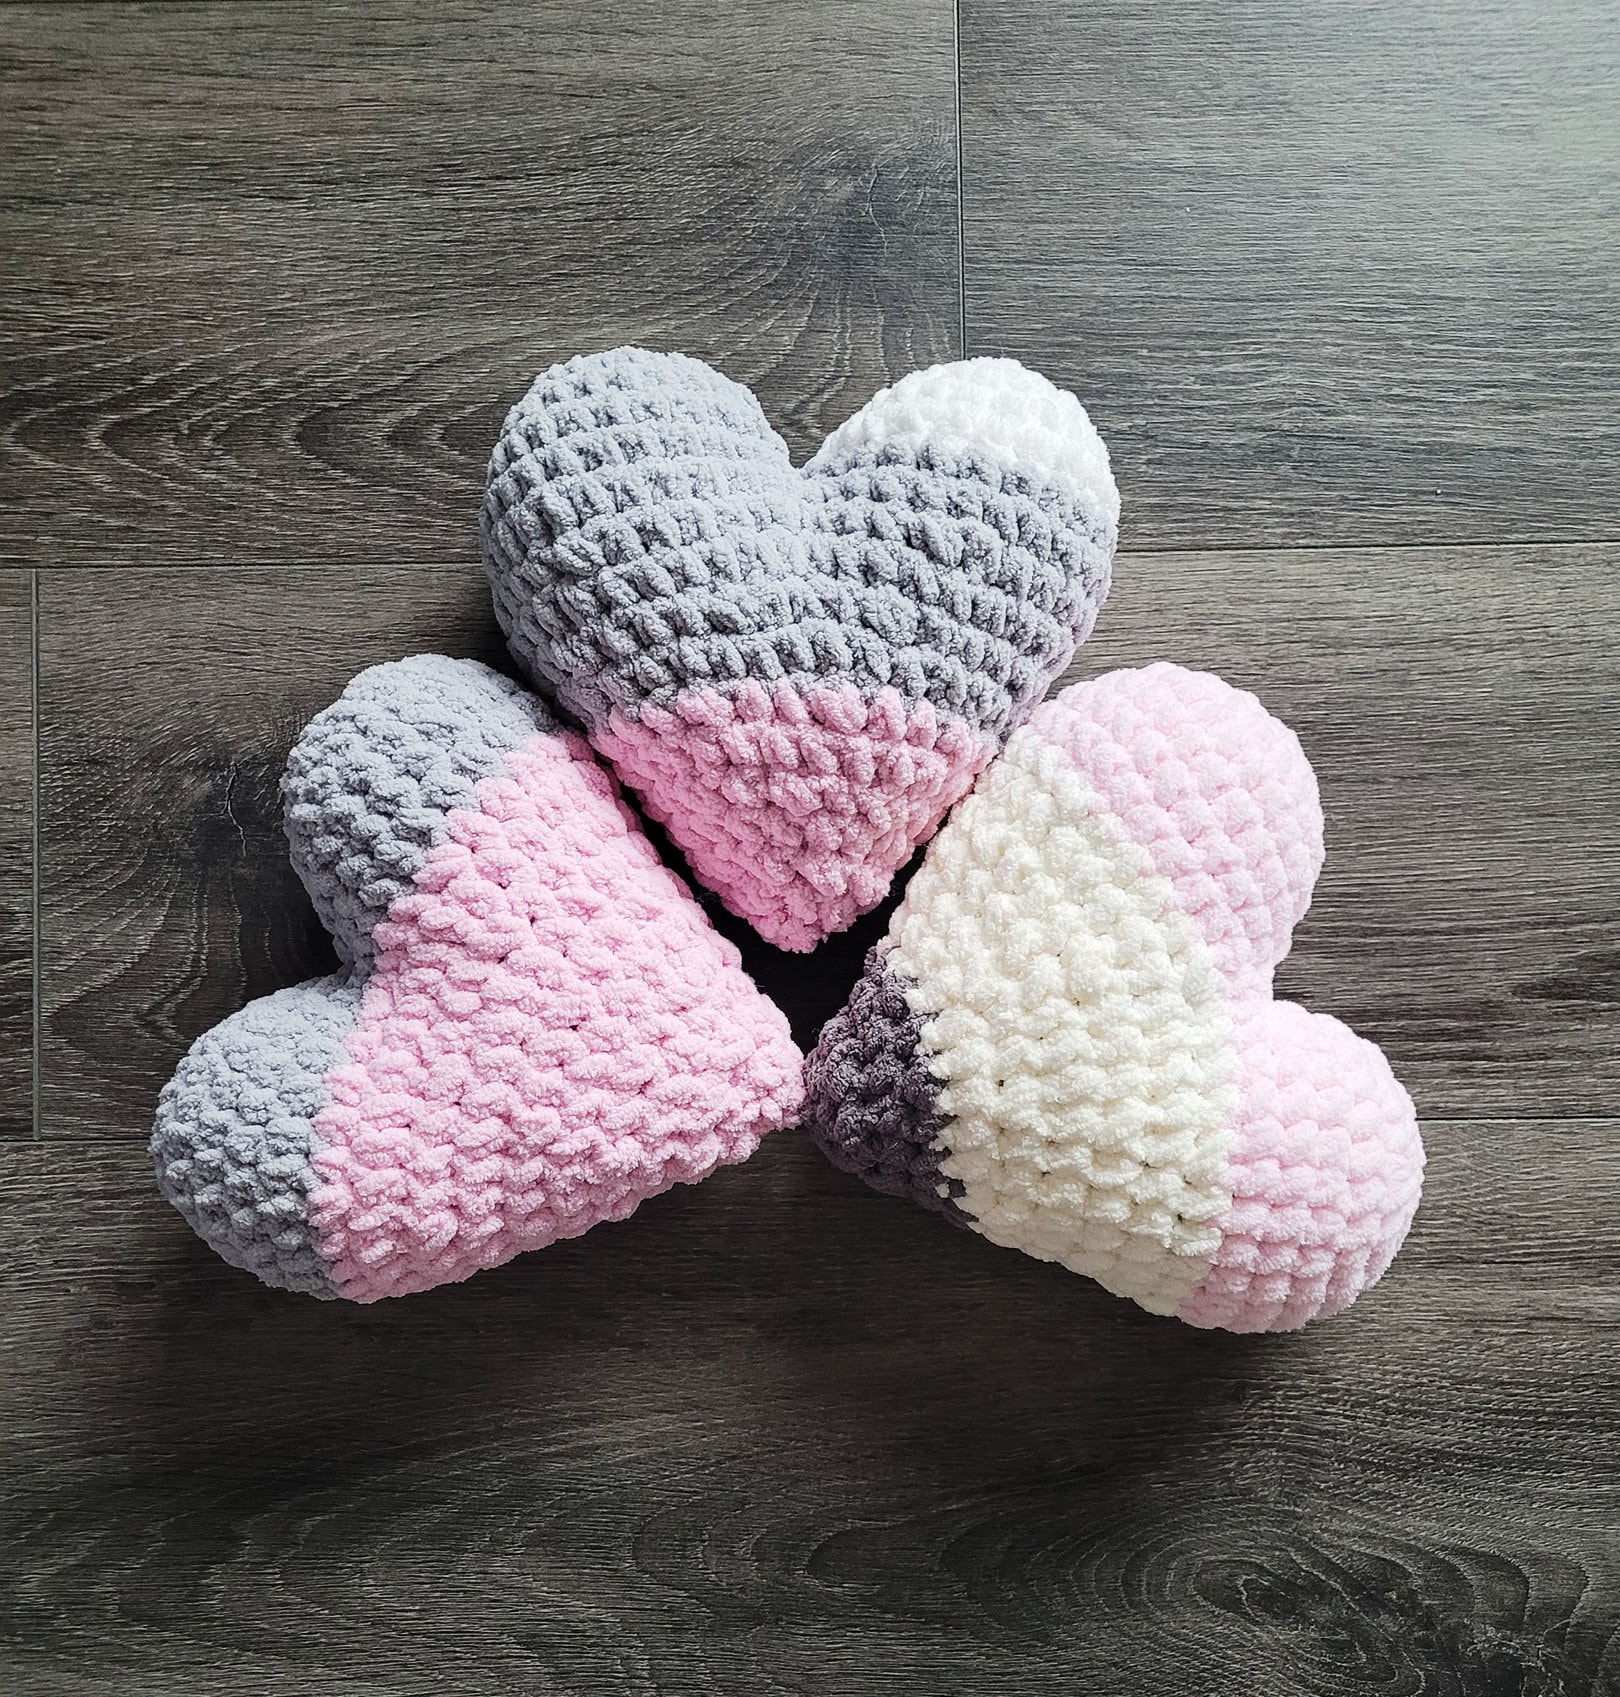 Solid Foam Pink Iridescent Heart Pick – TMIGifts